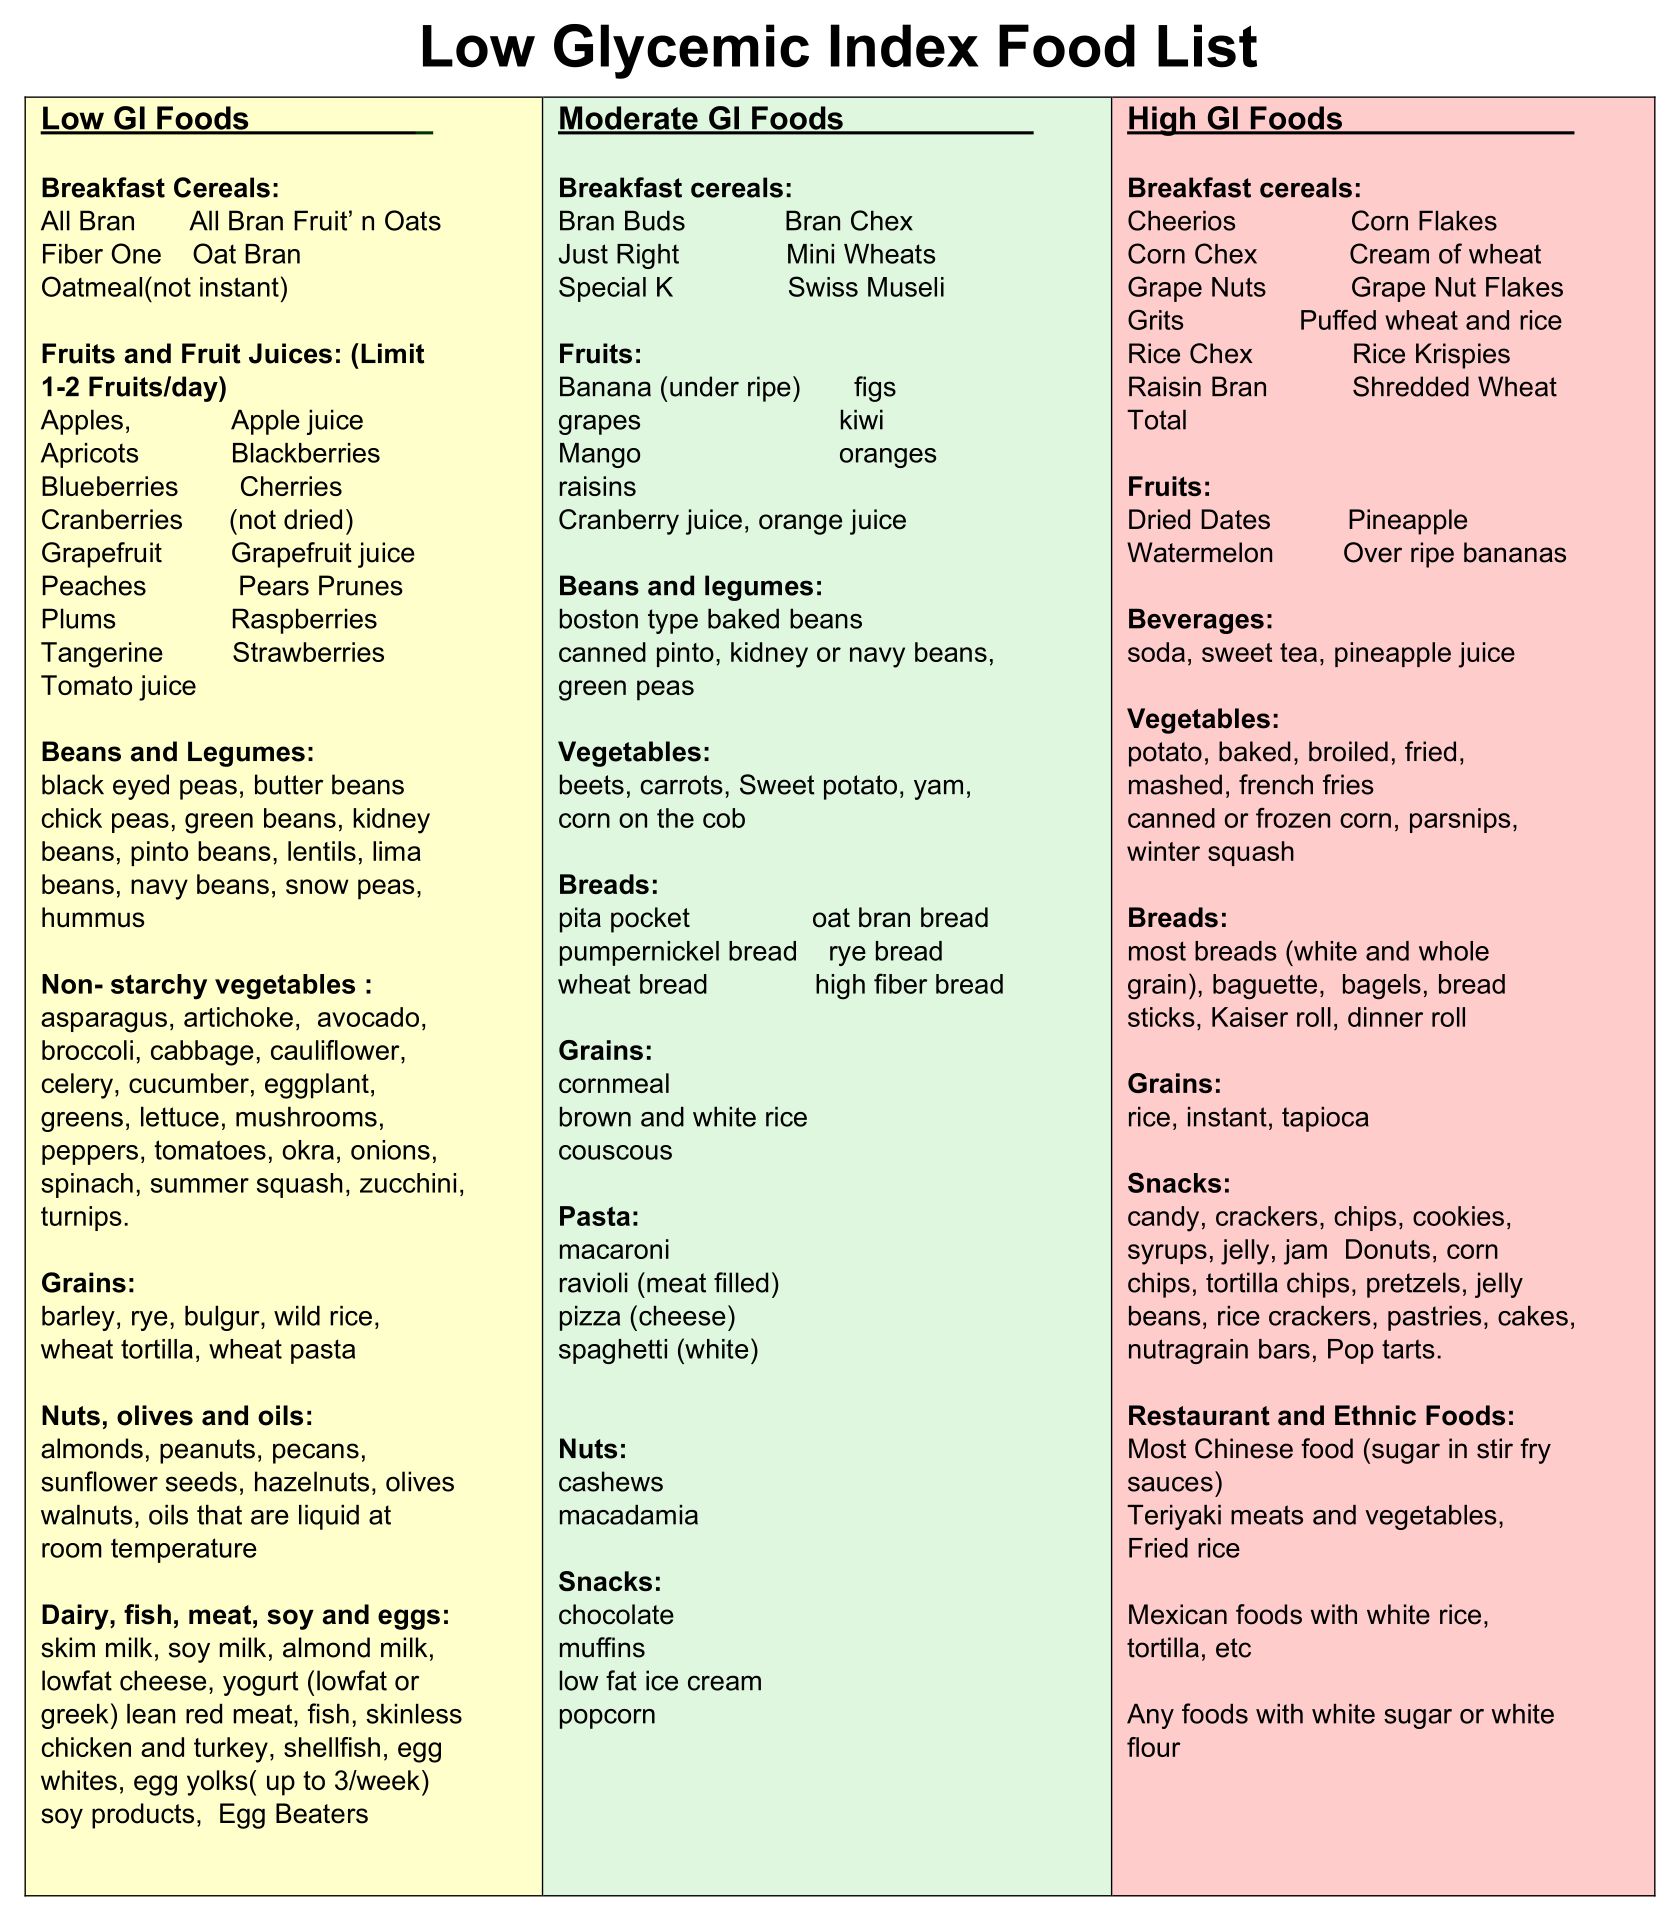 6 Best Images of Printable Low Glycemic Food Chart - Low Glycemic Index ...